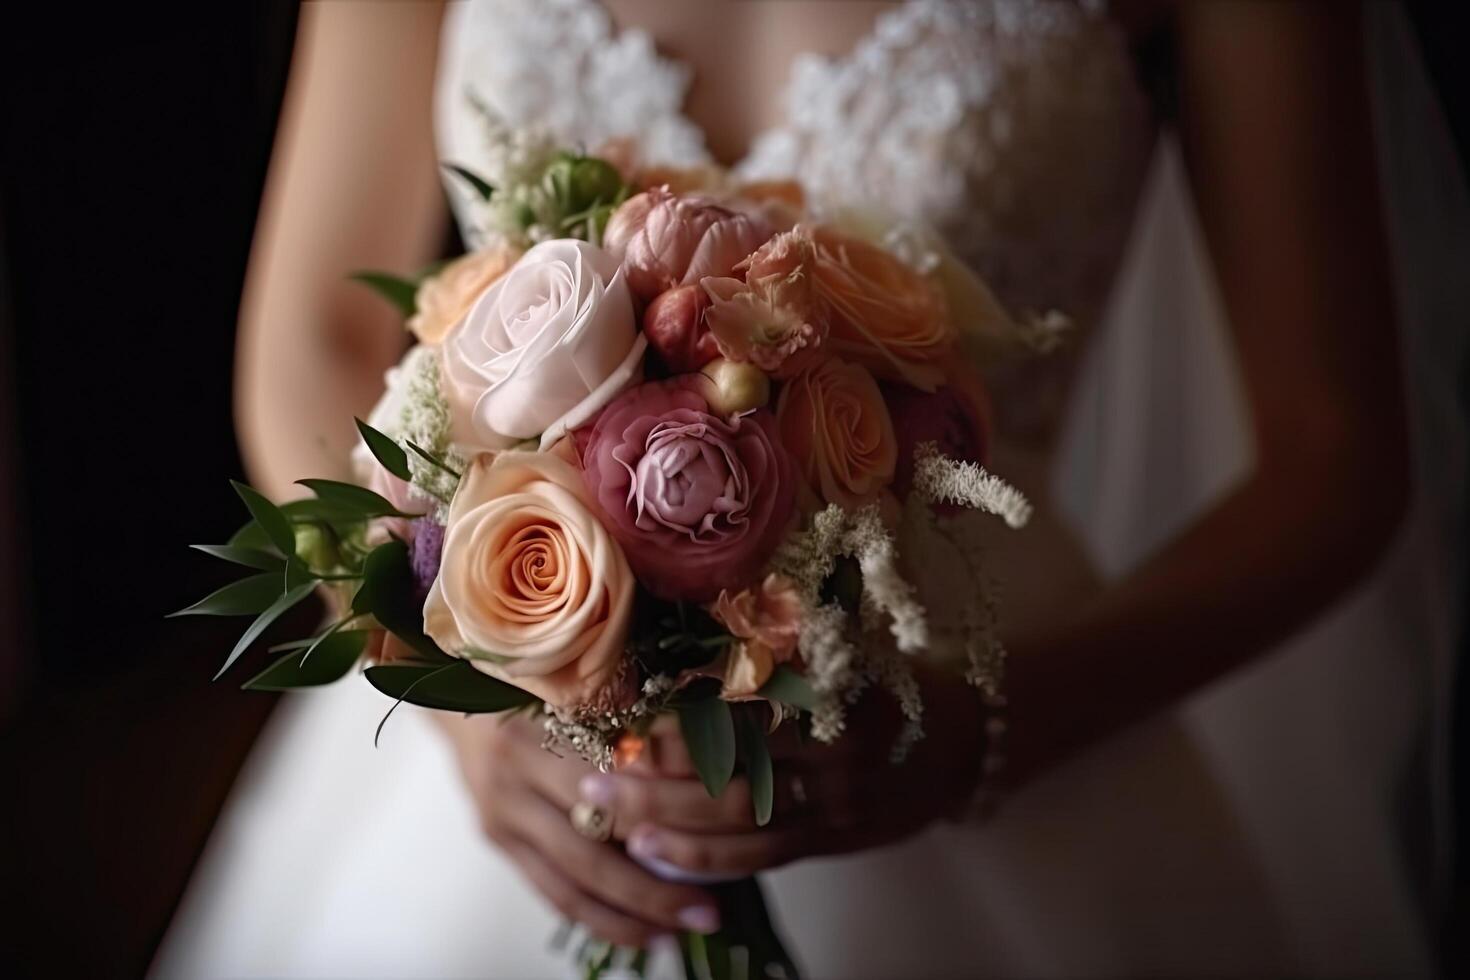 Beautiful bridal bouquet in the hands of the bride, closeup, bride holding a beautiful wedding bouquet close to her chest, photo